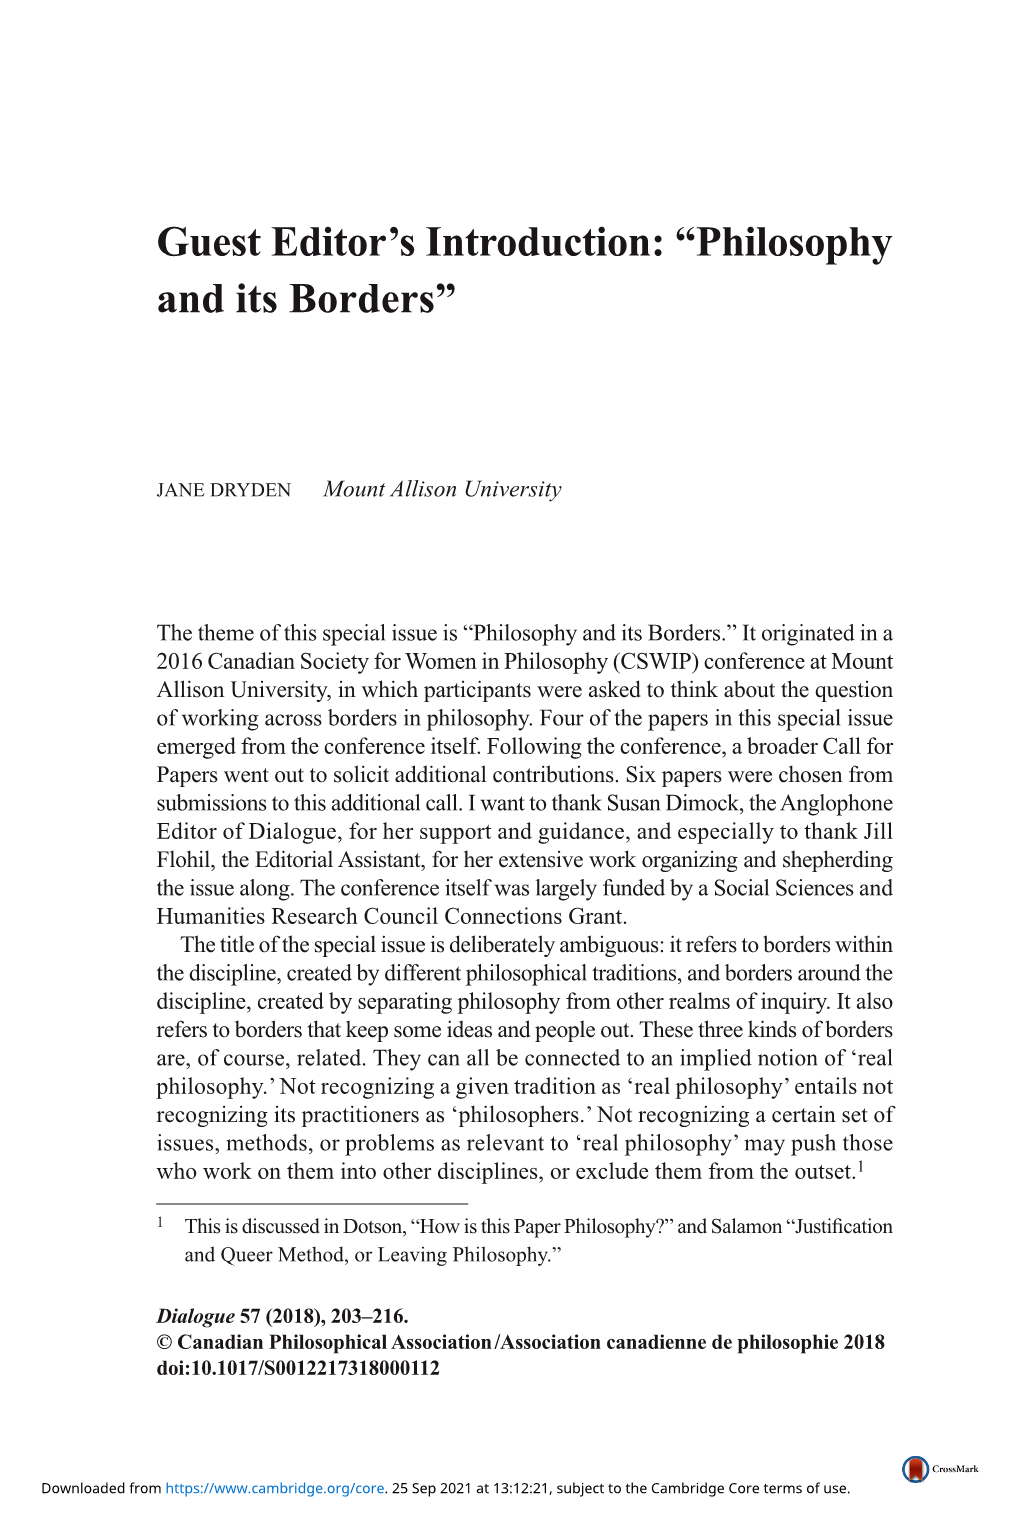 Guest Editor's Introduction: “Philosophy and Its Borders”